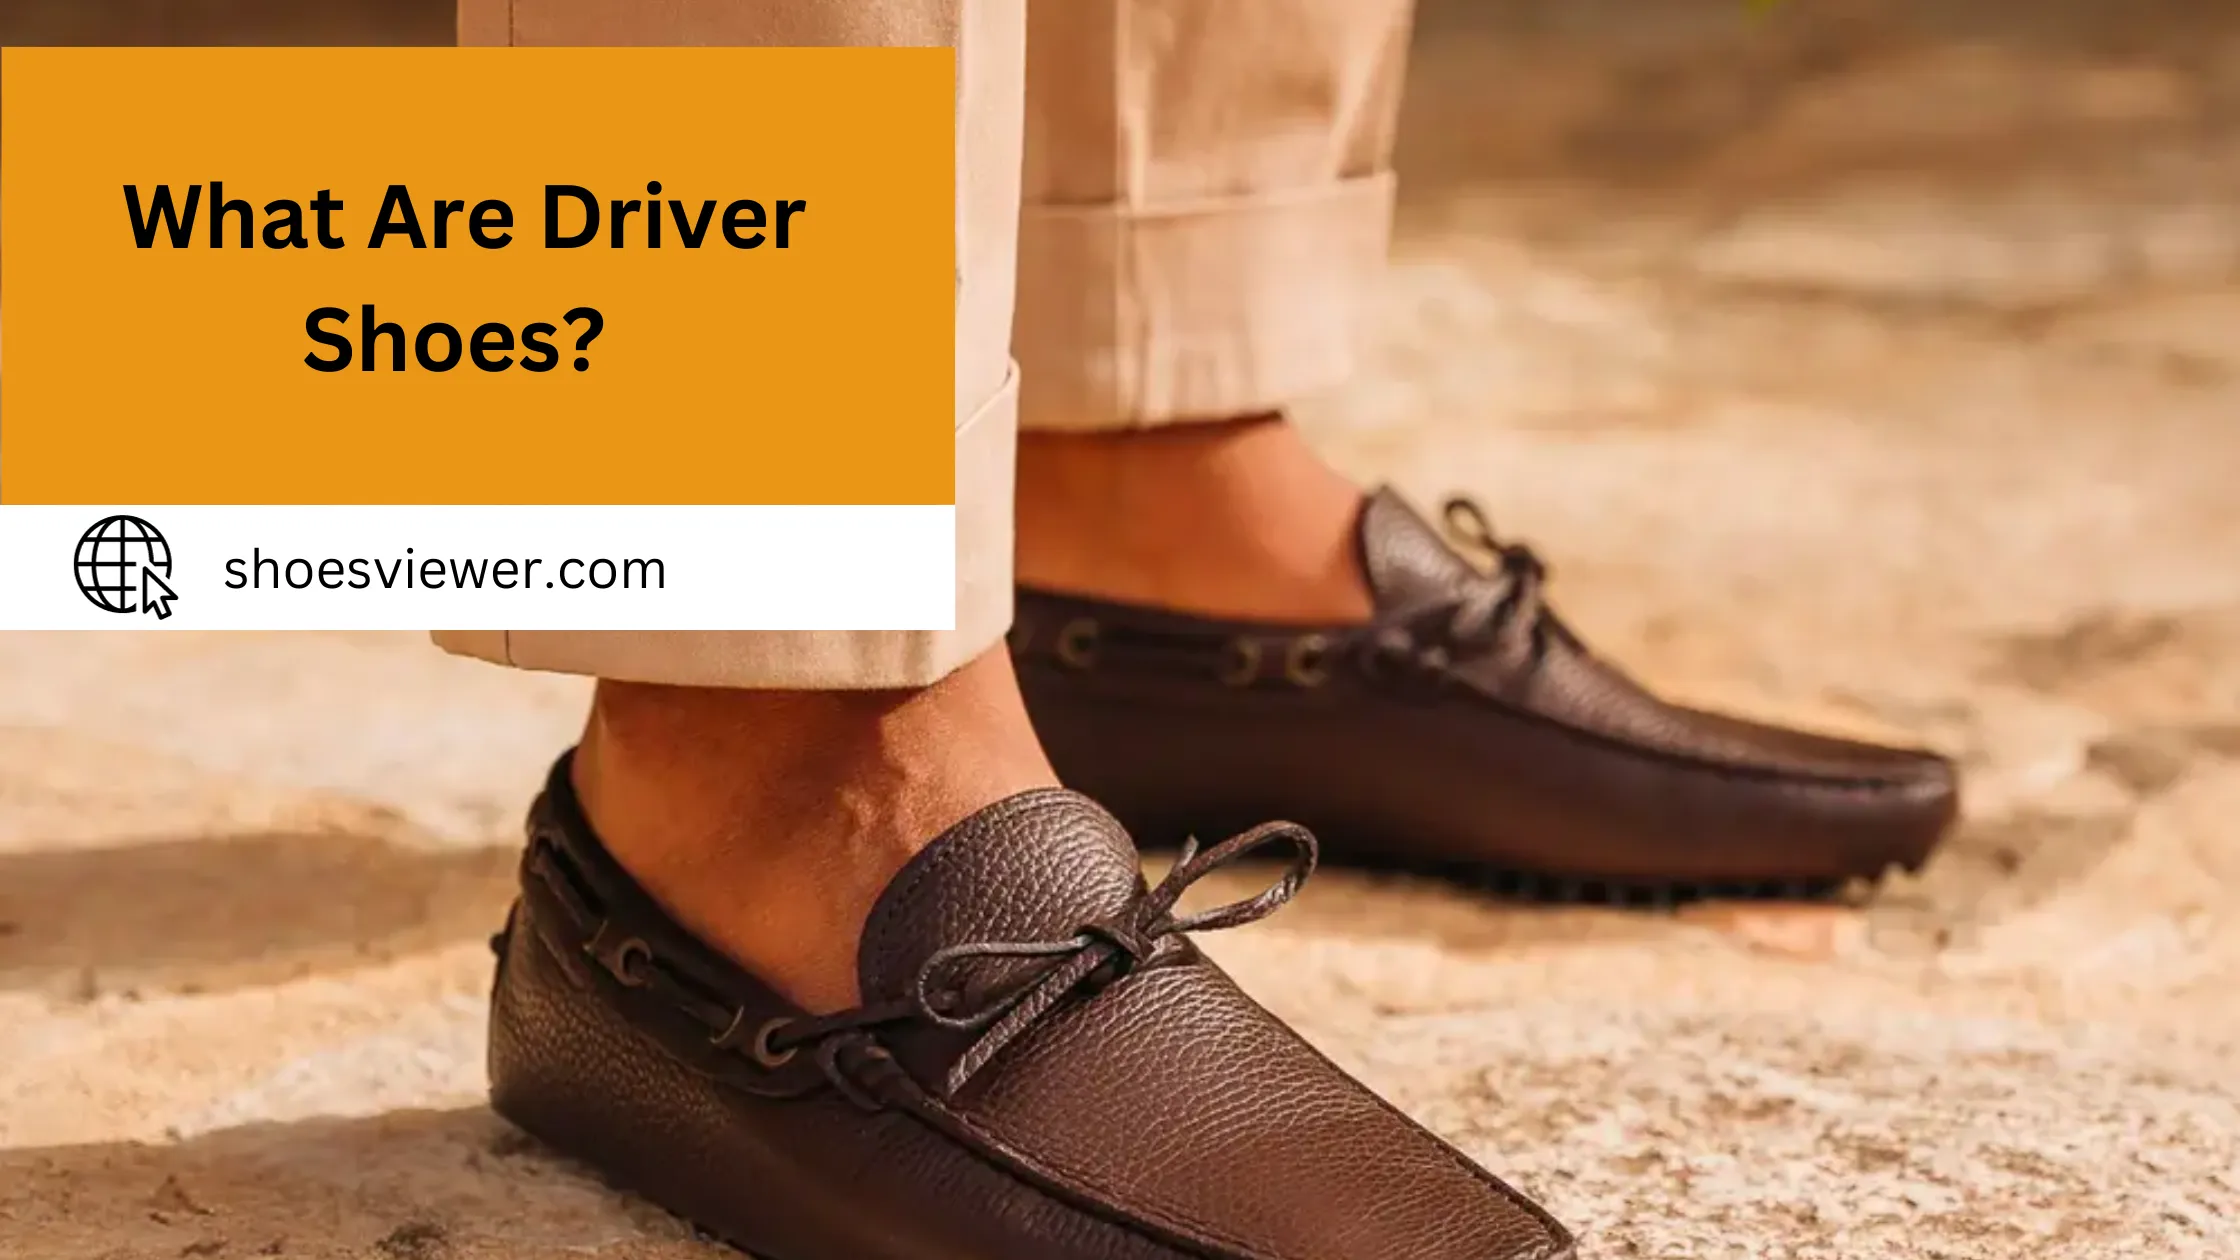 What Are Driver Shoes? You Should Need to Know